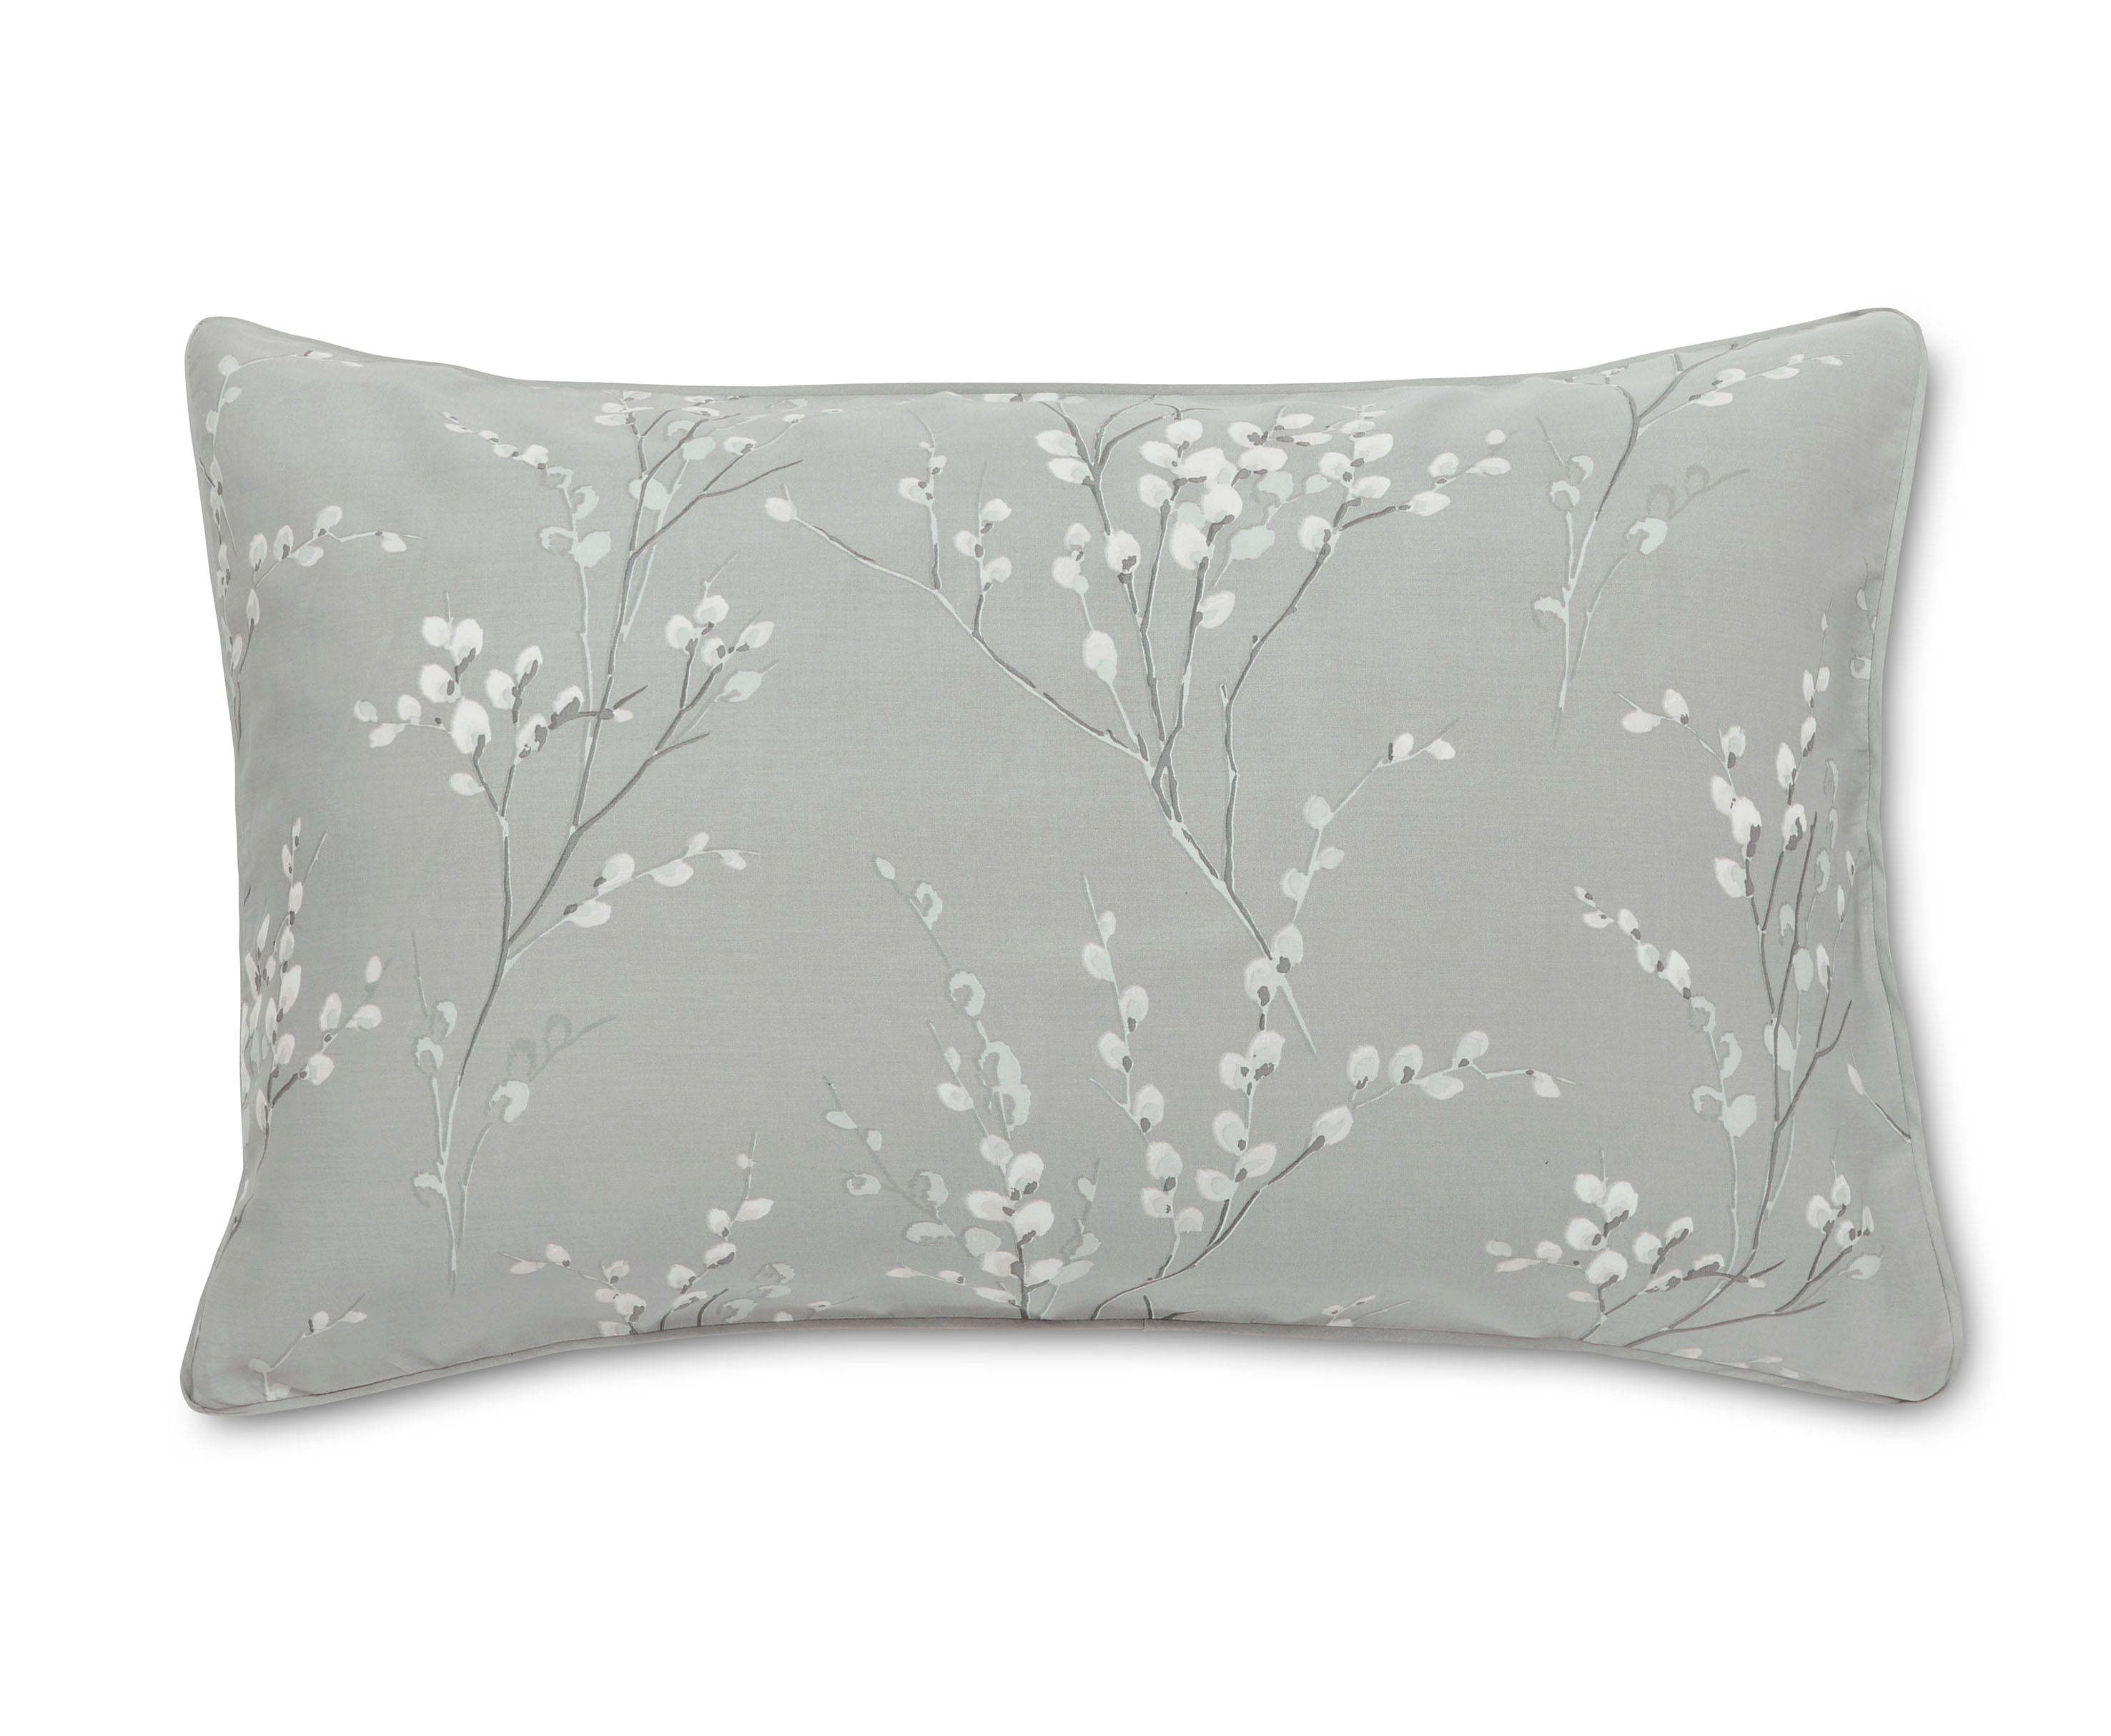 Laura Ashley Pussy Willow Steel Duvet Cover and Pillowcase Set